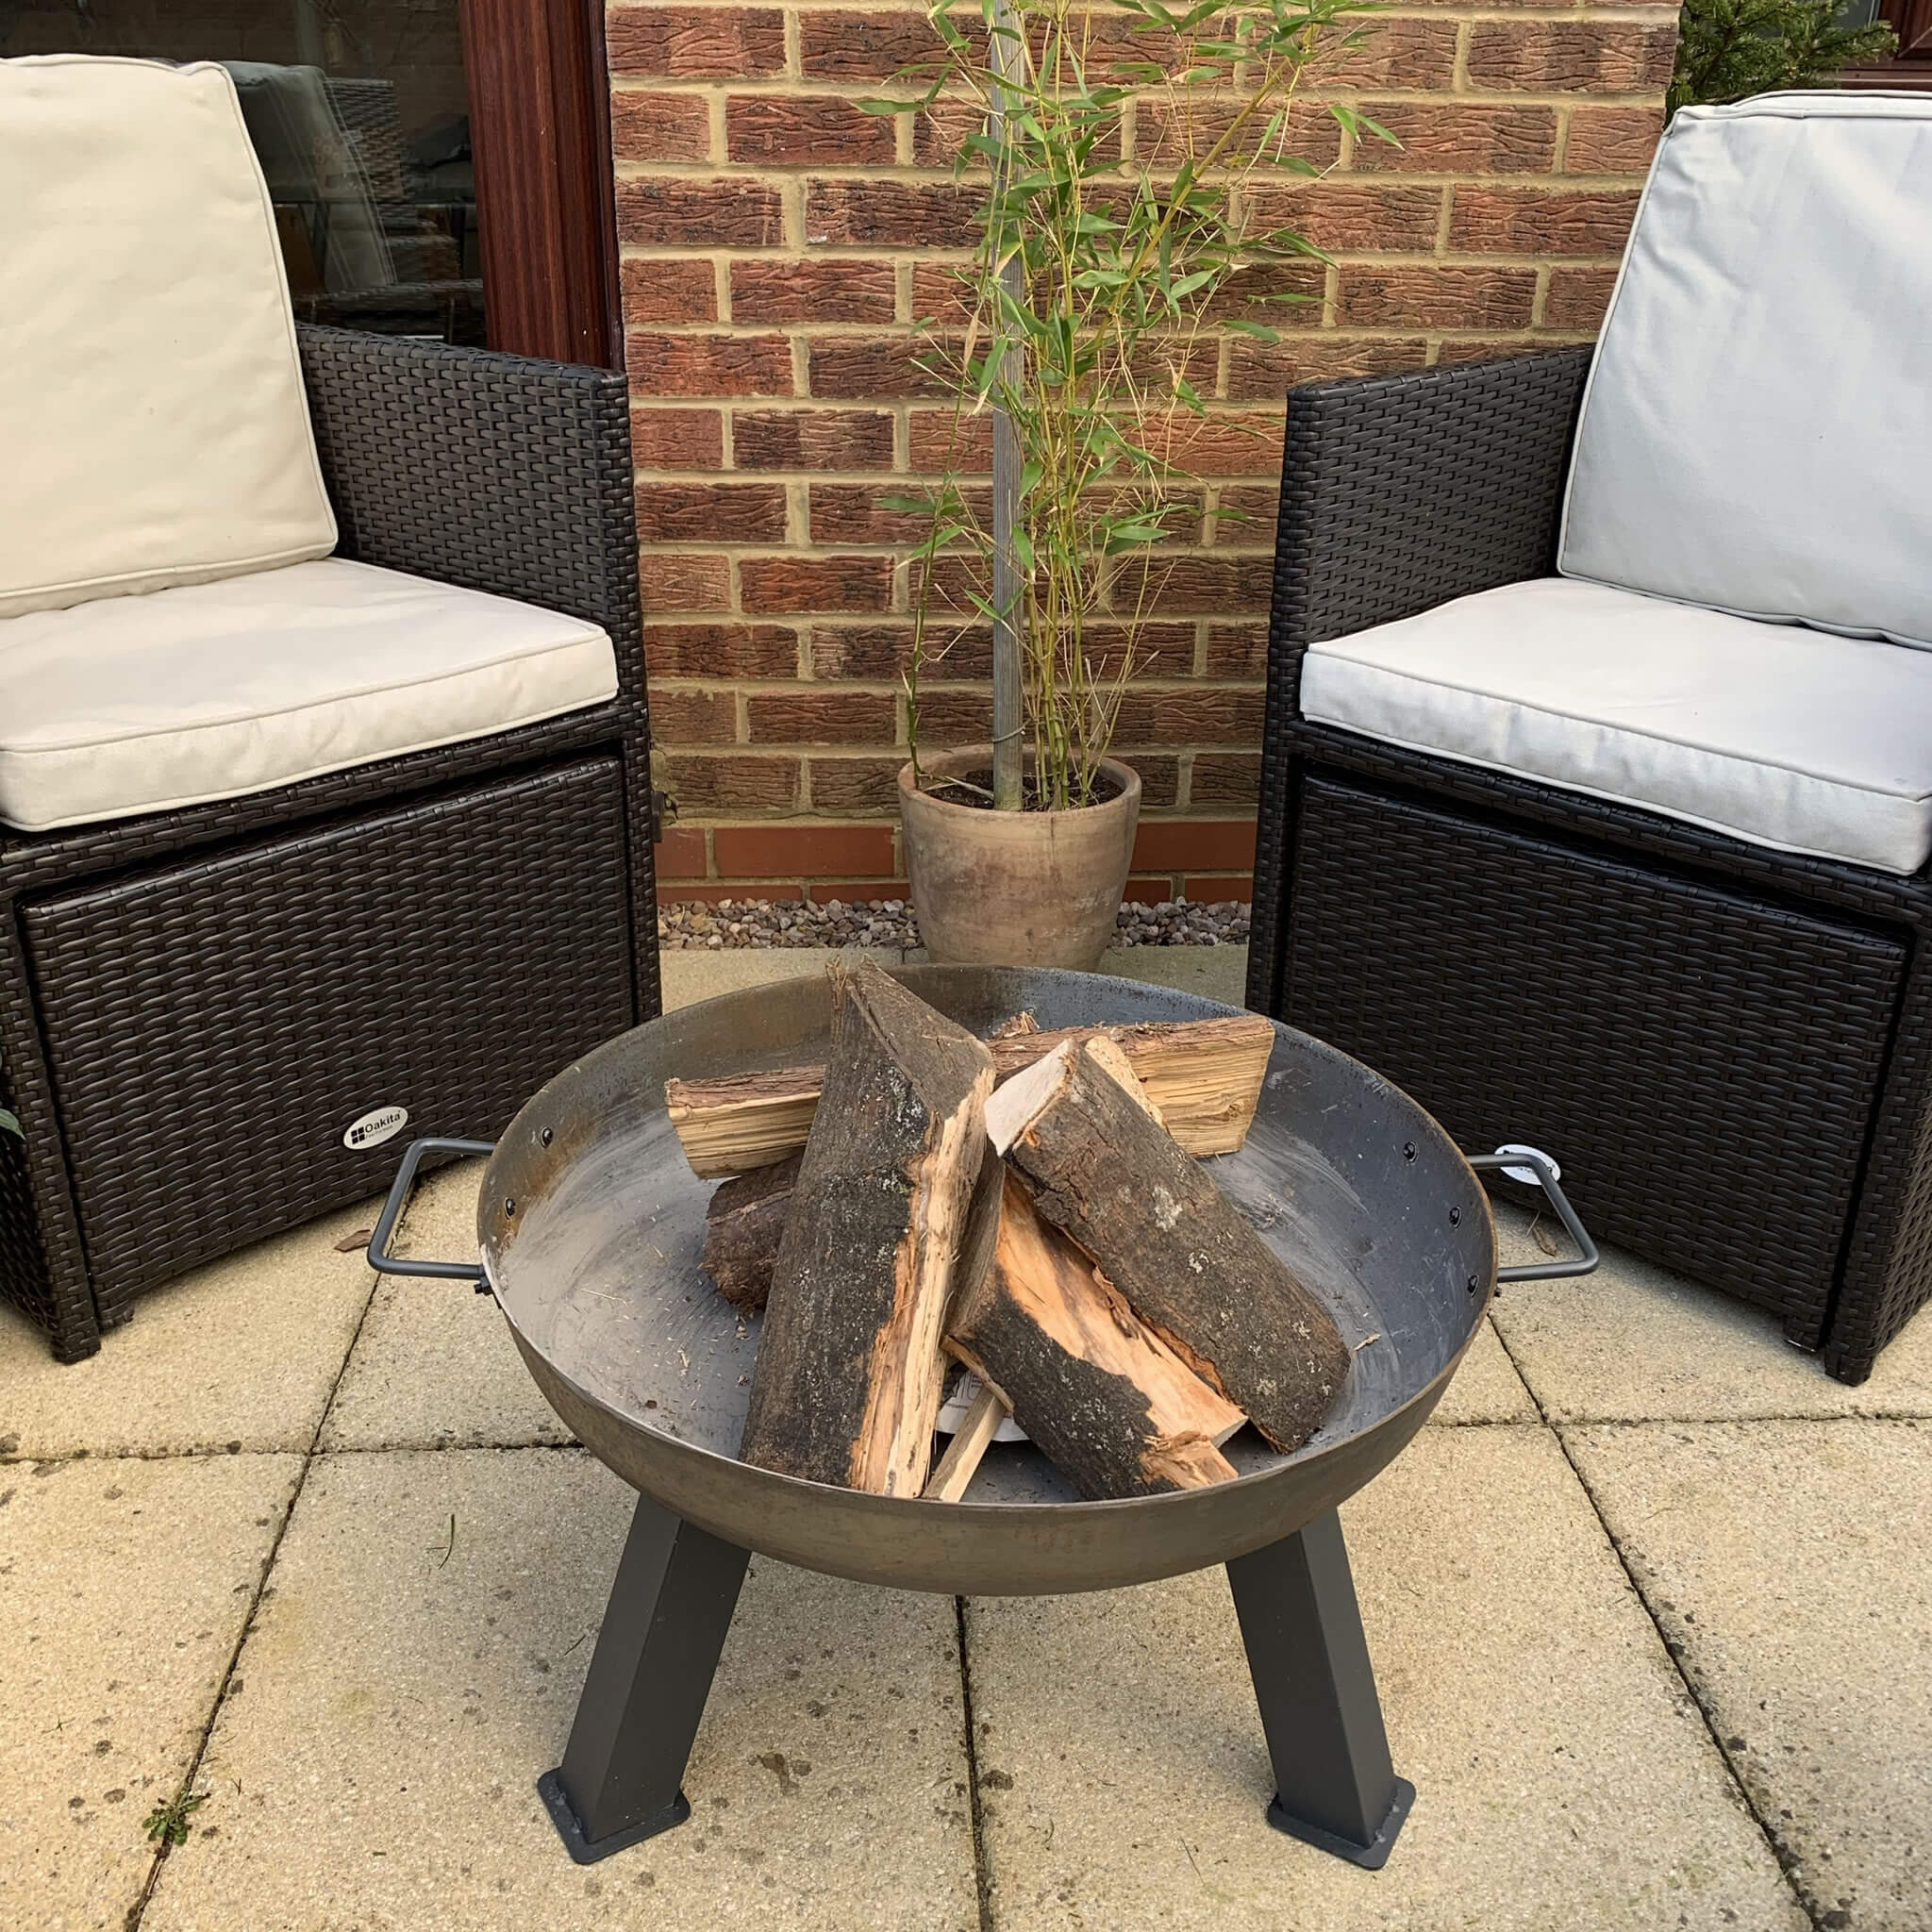 Radiance Cast Iron Fire Pit - Alfresco Dining Company